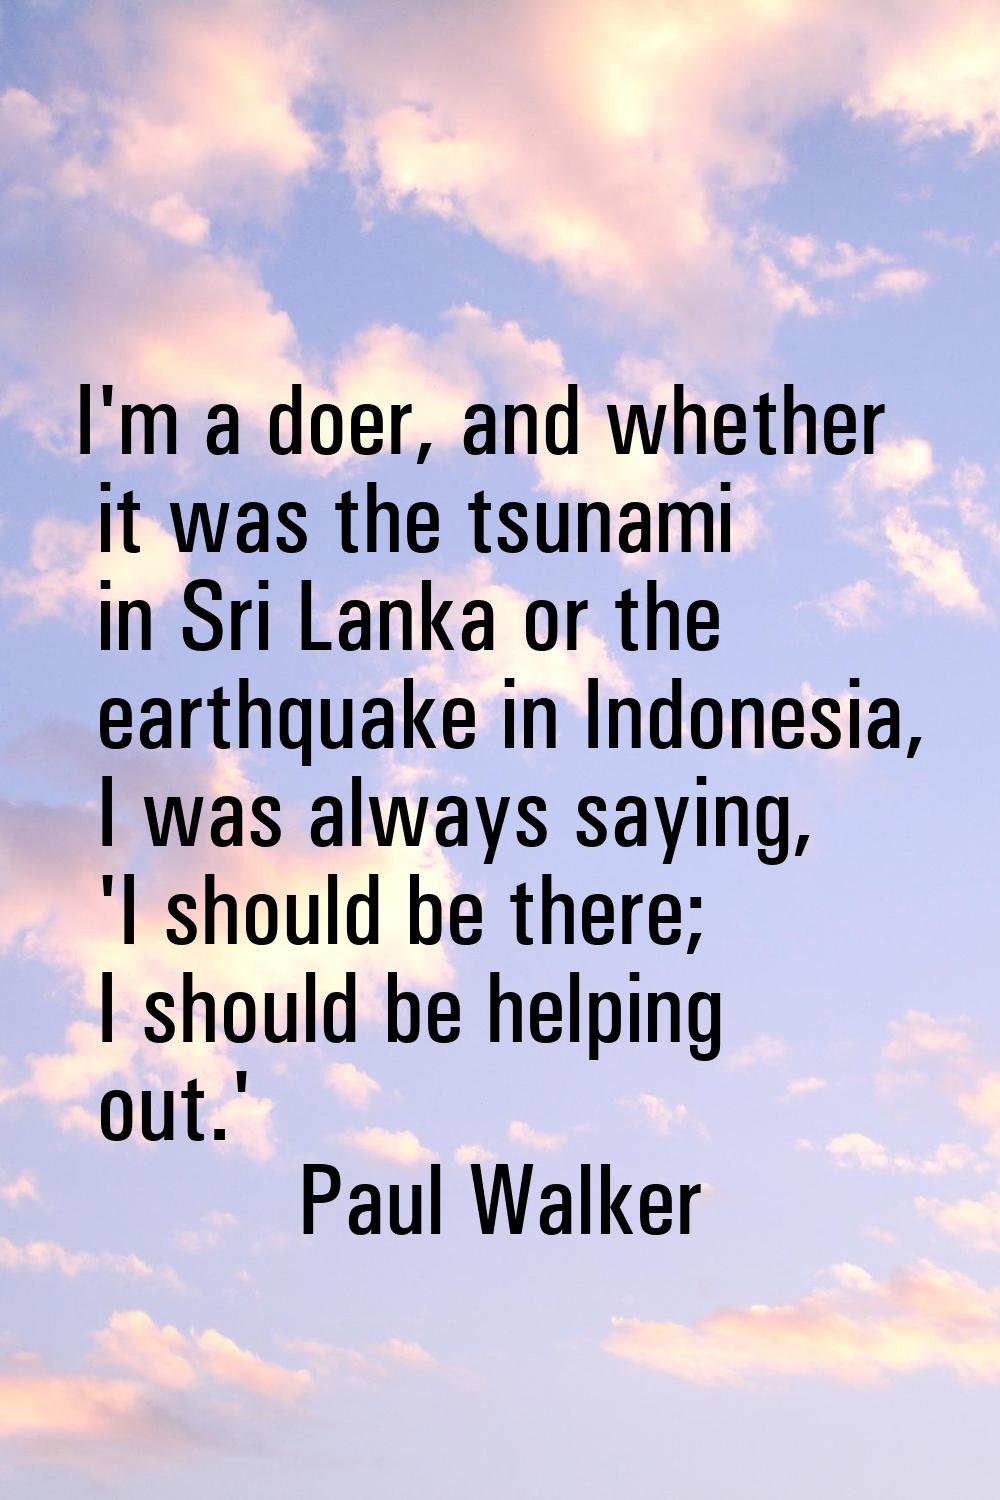 I'm a doer, and whether it was the tsunami in Sri Lanka or the earthquake in Indonesia, I was alway